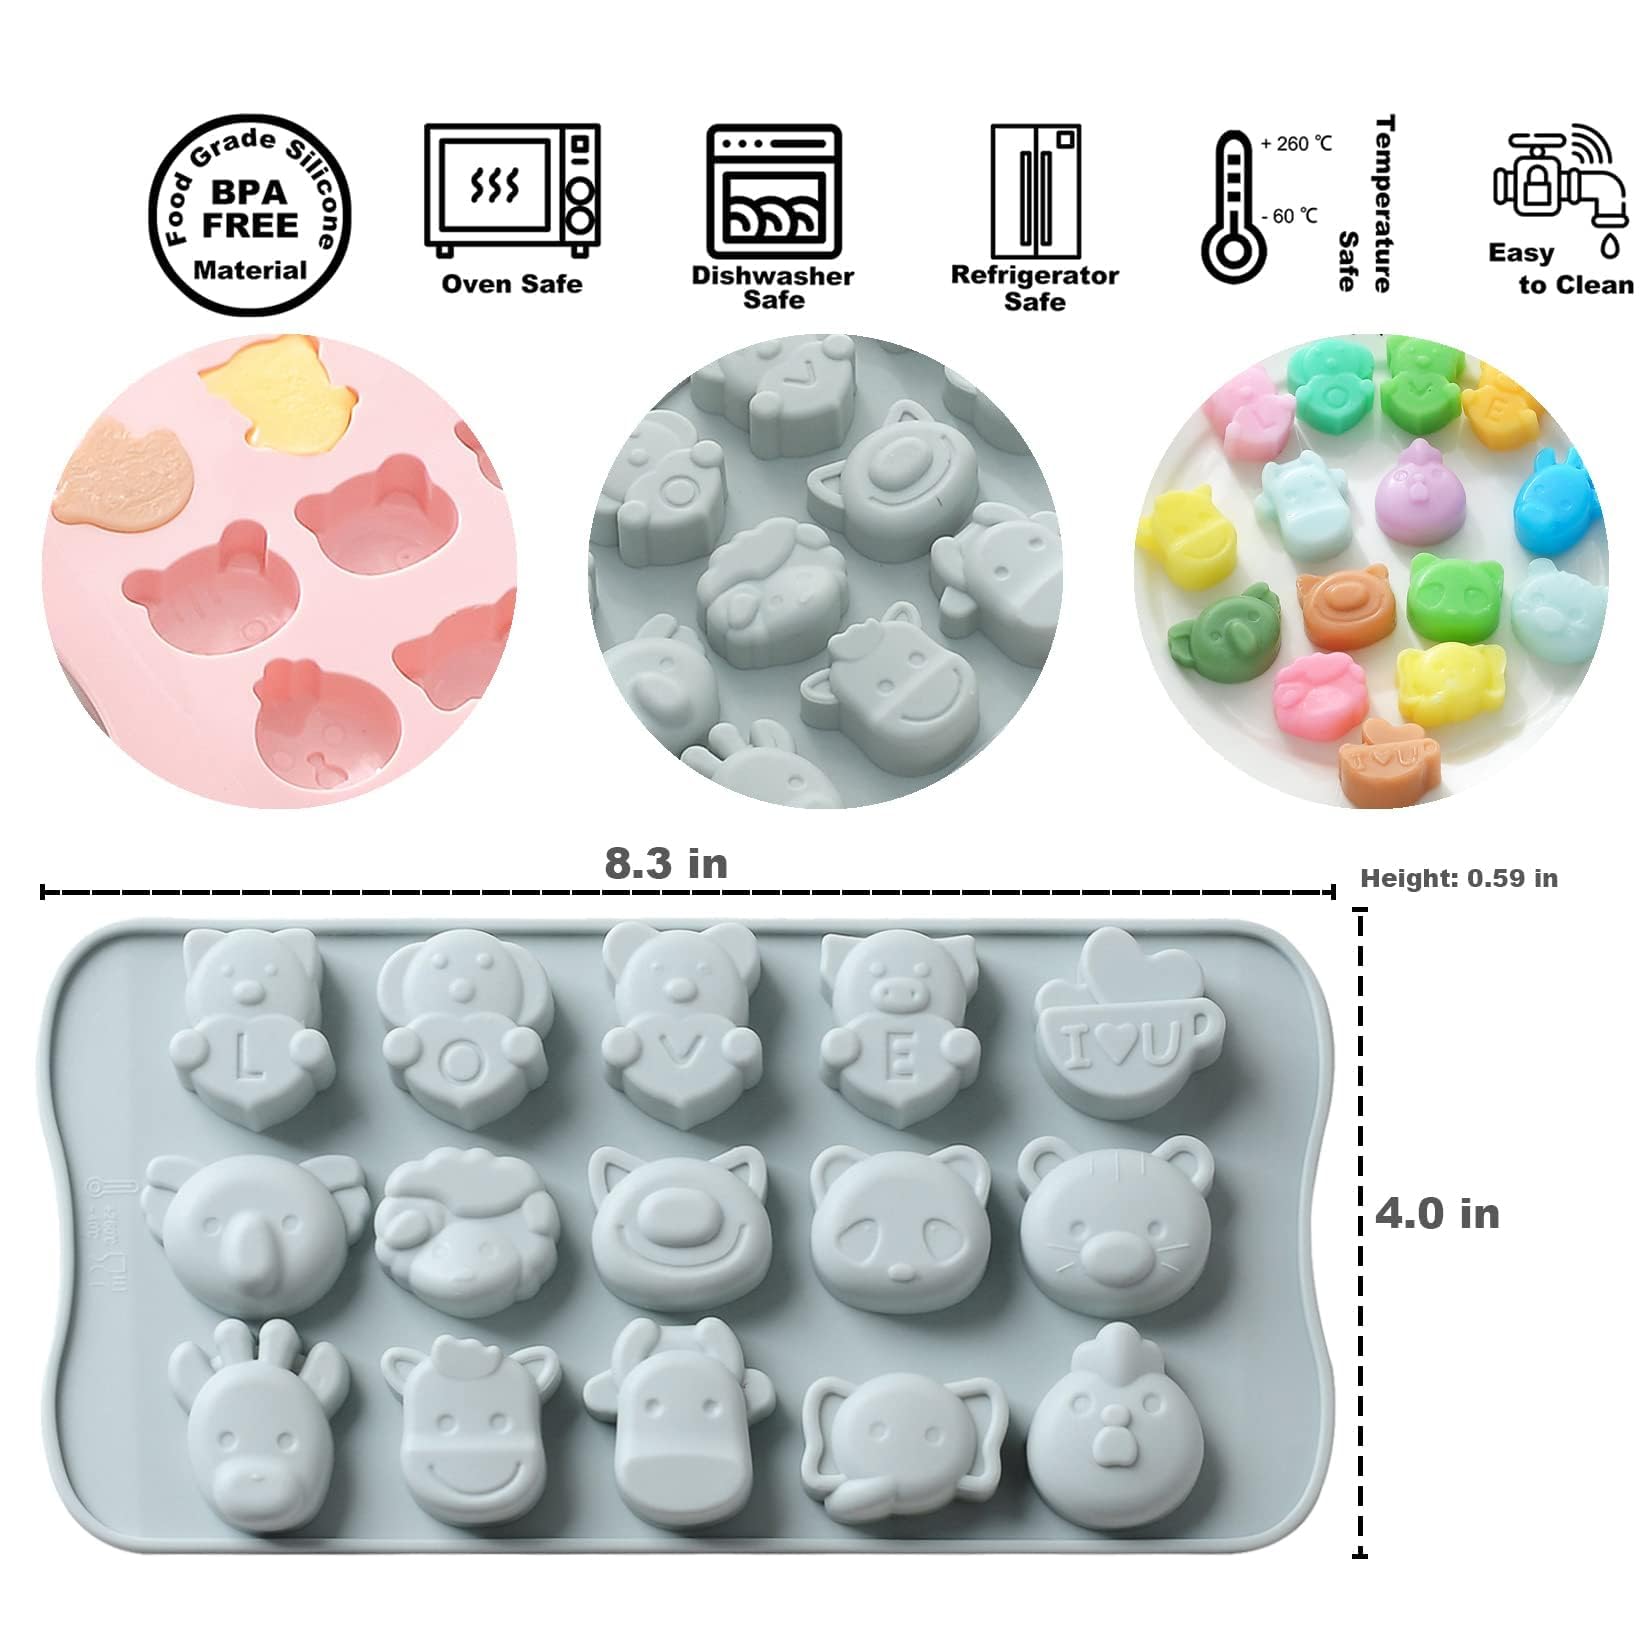 REKIDOOL Happy Farm Confectioners Molds Set, 2 Pieces Non-stick Chocolate Silicone Mold for Cake Cookies Candy Jelly Gummy Handmaking-soap, Ice Tray, Cupcake Topper